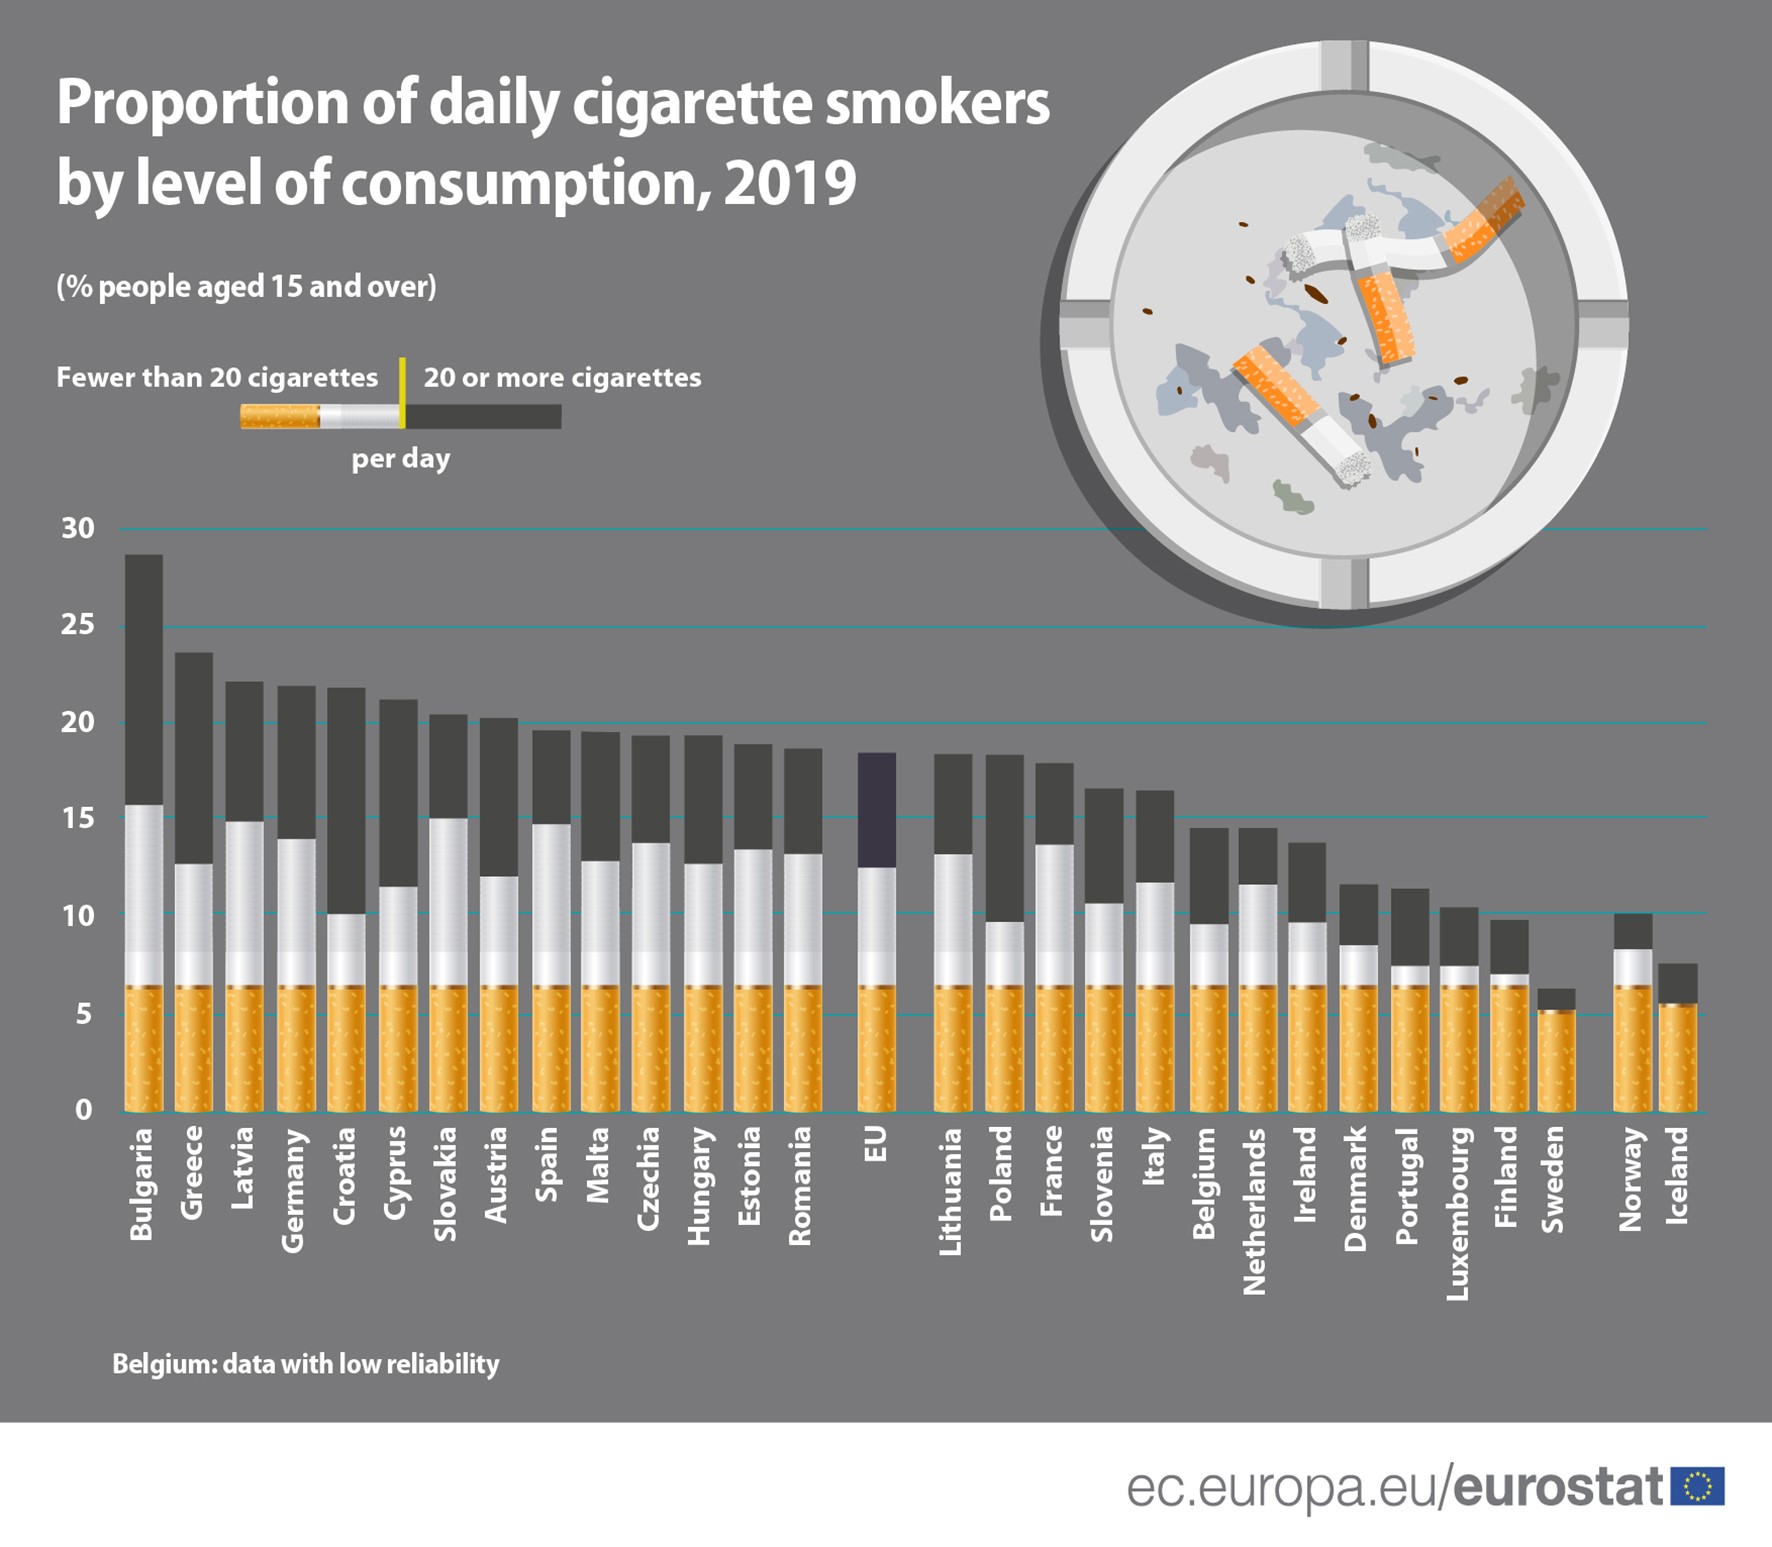 Bar chart: Proportion of daily cigarette smokers by level of consumption, EU, EU Member States and EFTA, 2019, %